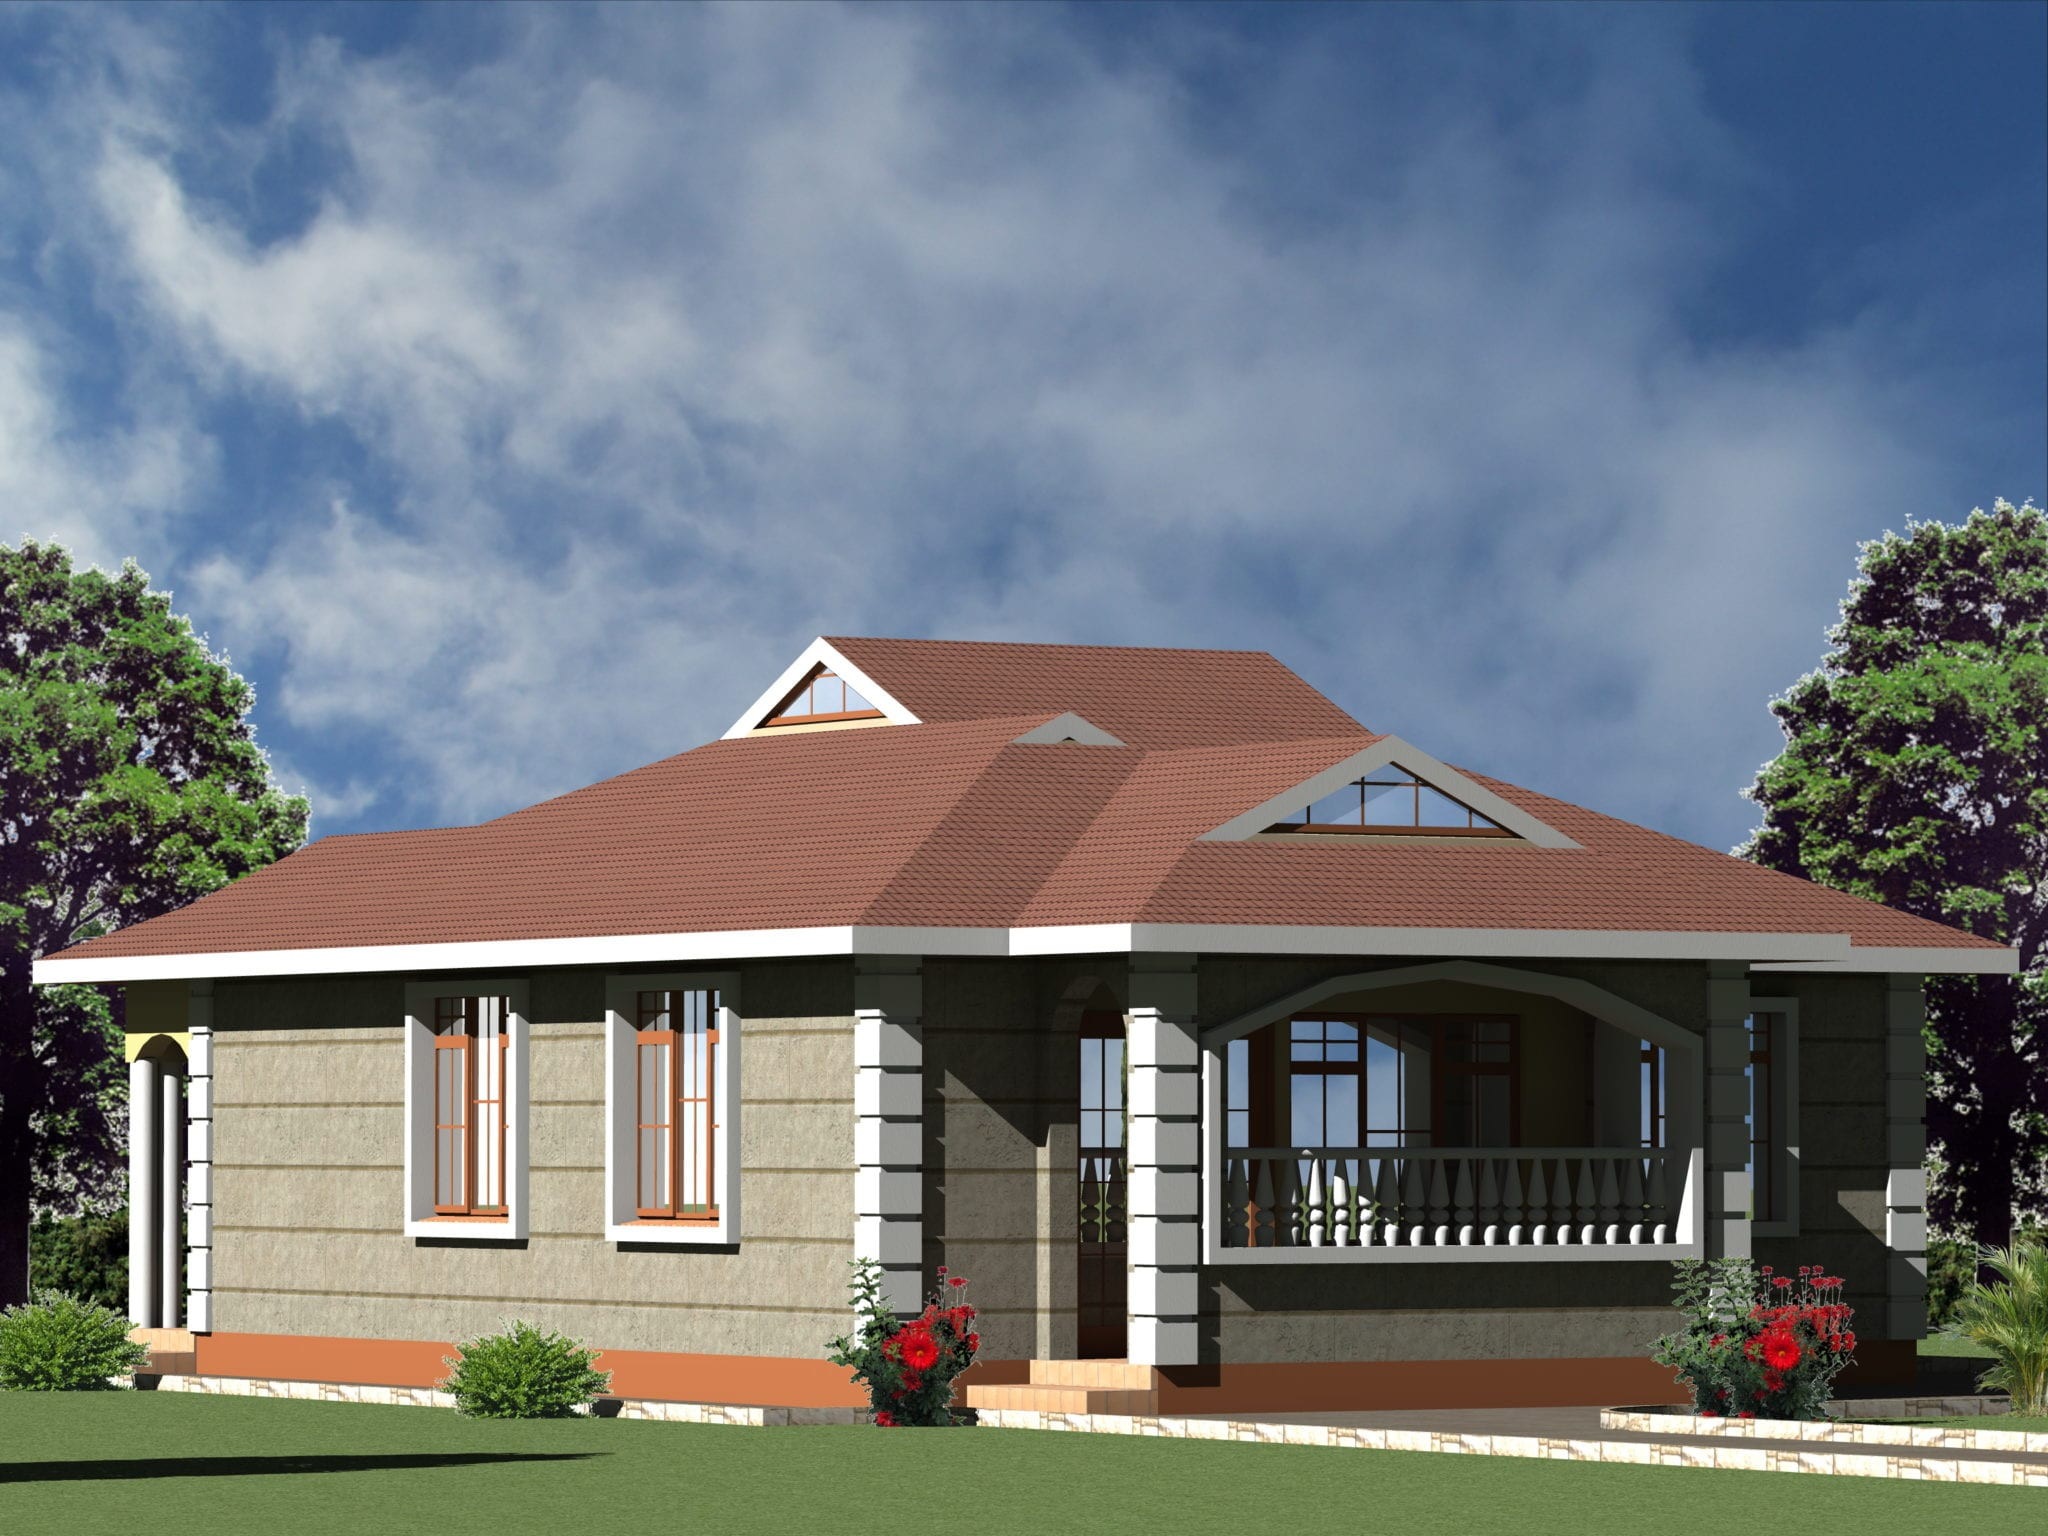 Small Three Bedroom House Plan
 Simple & Small 3 bedroom house plan